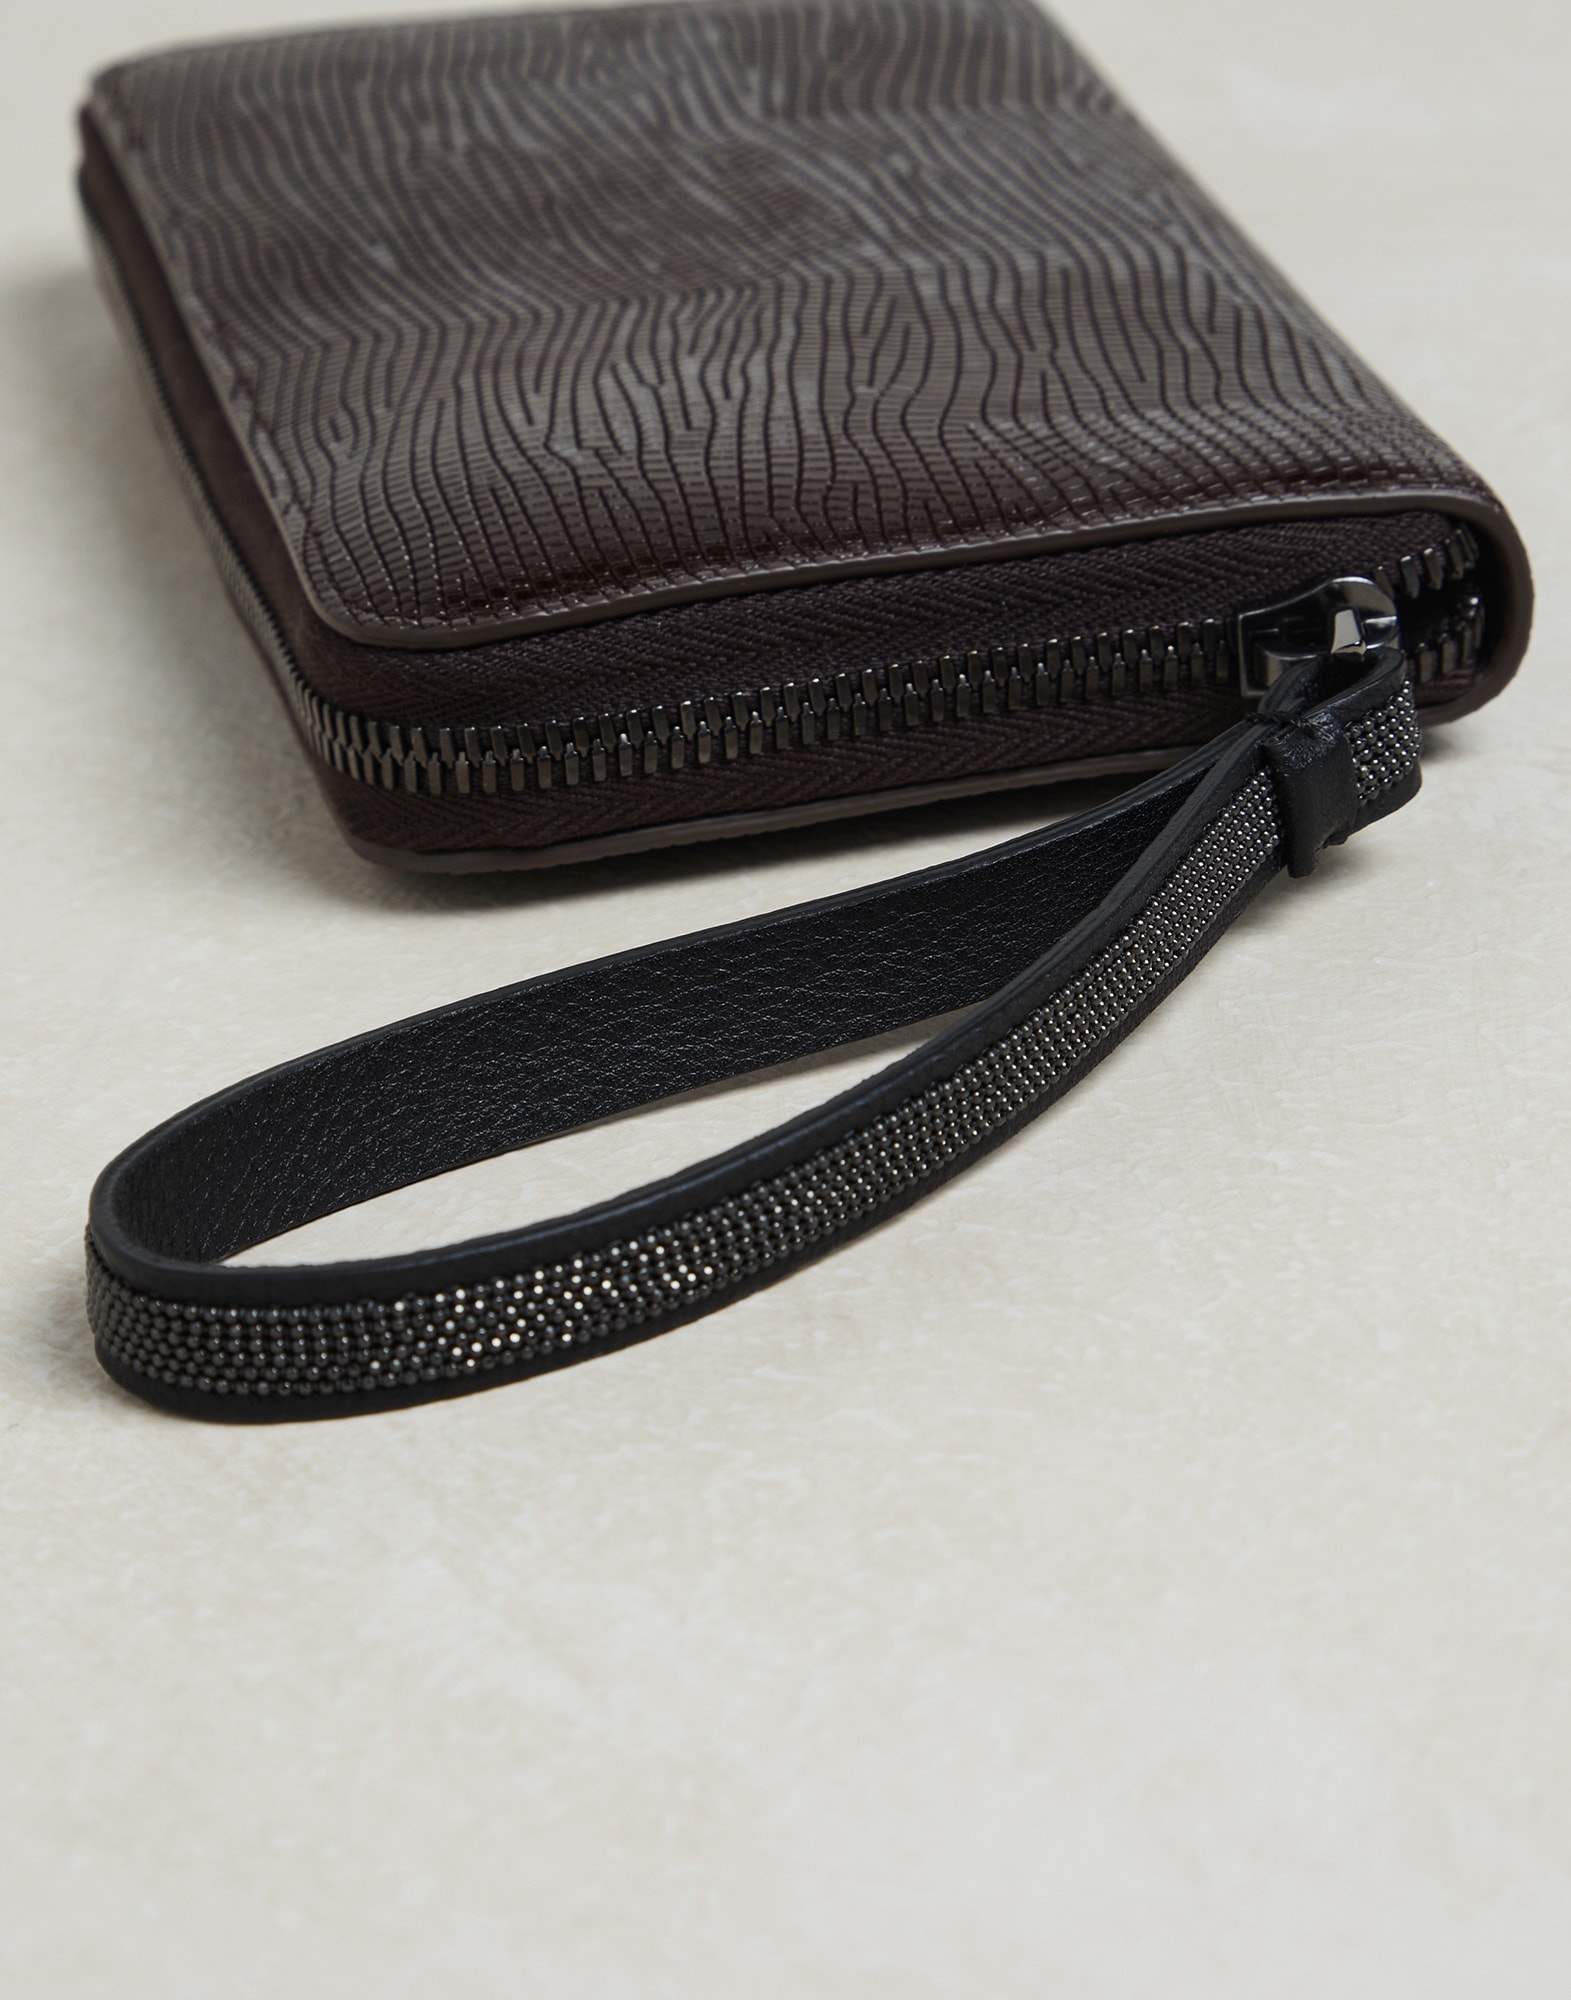 Lizard print leather wallet with precious zipper pull - 3